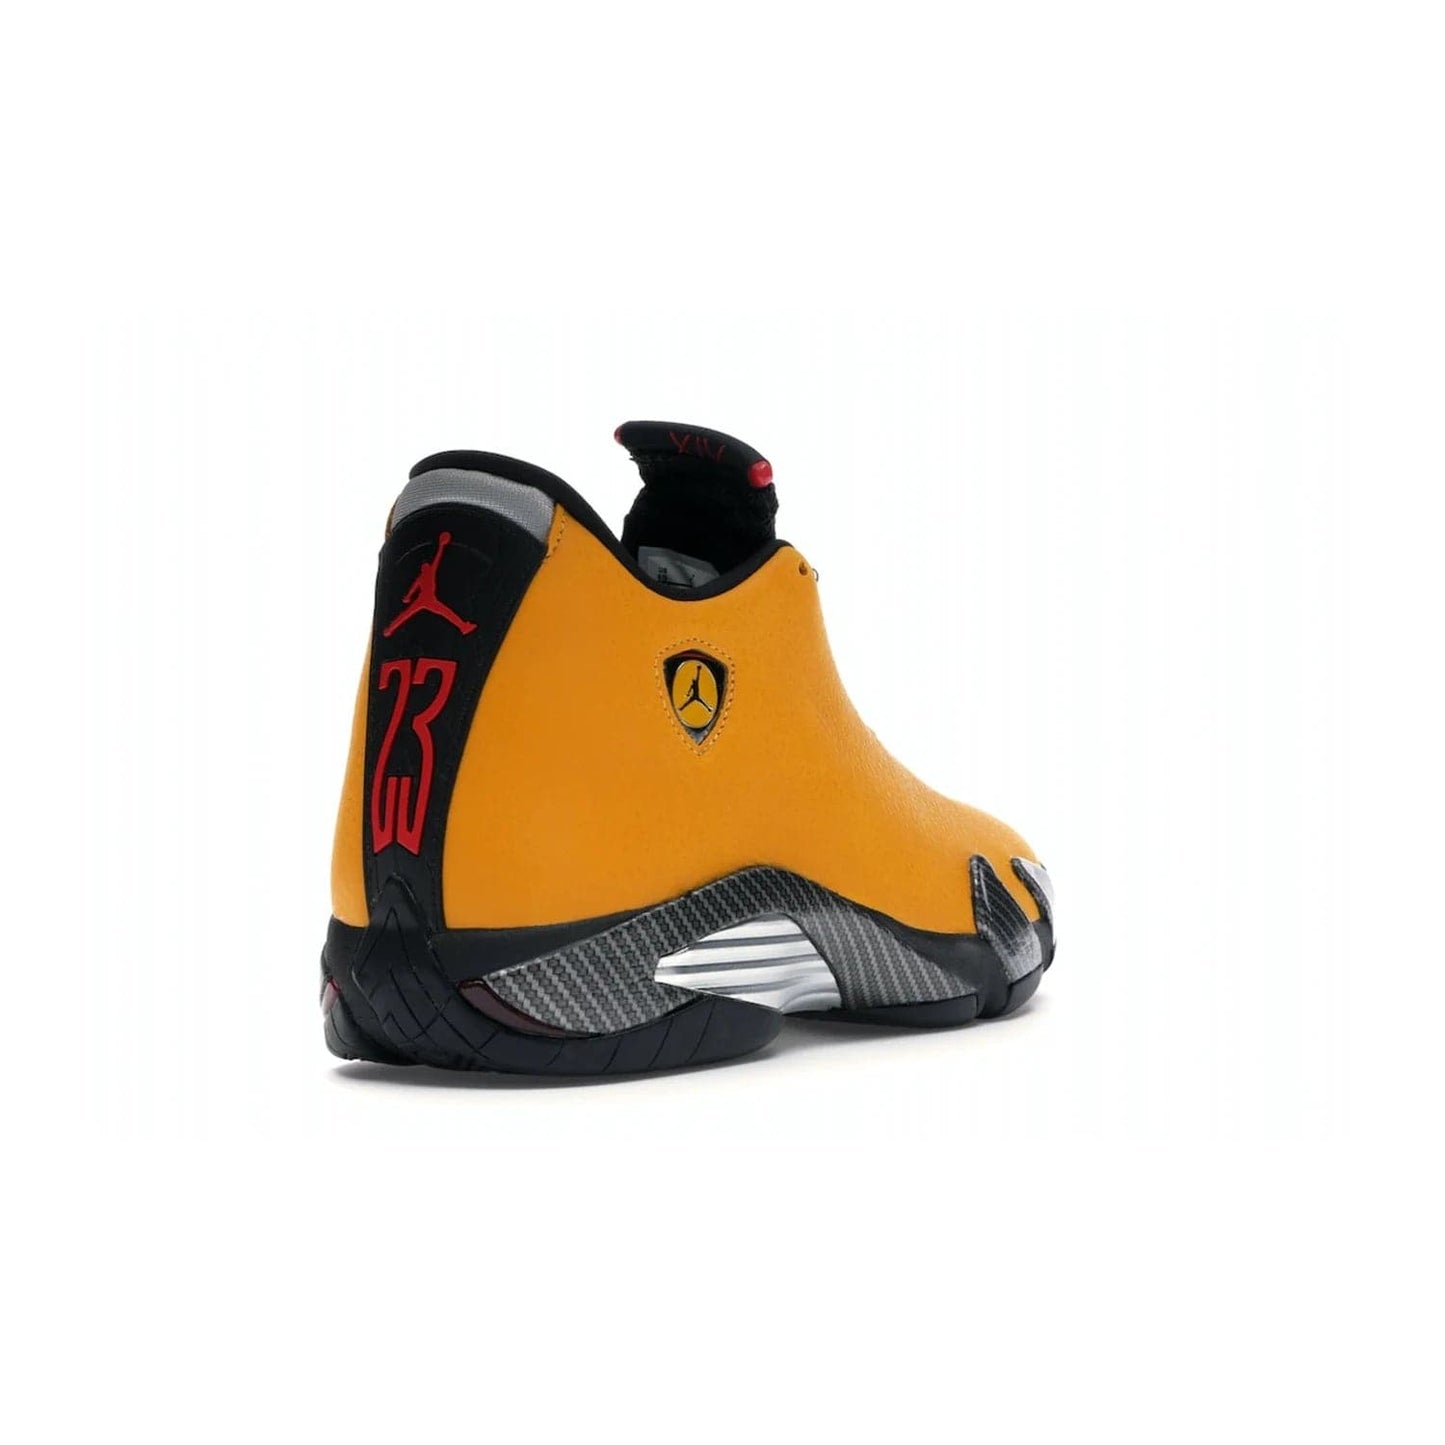 Jordan 14 Retro University Gold - Image 31 - Only at www.BallersClubKickz.com - Air Jordan 14 Retro University Gold: High-quality leather sneaker with Jumpman, tongue & heel logos. Zoom Air units & herringbone traction for superior comfort. University Gold outsole for stylish streetwear.